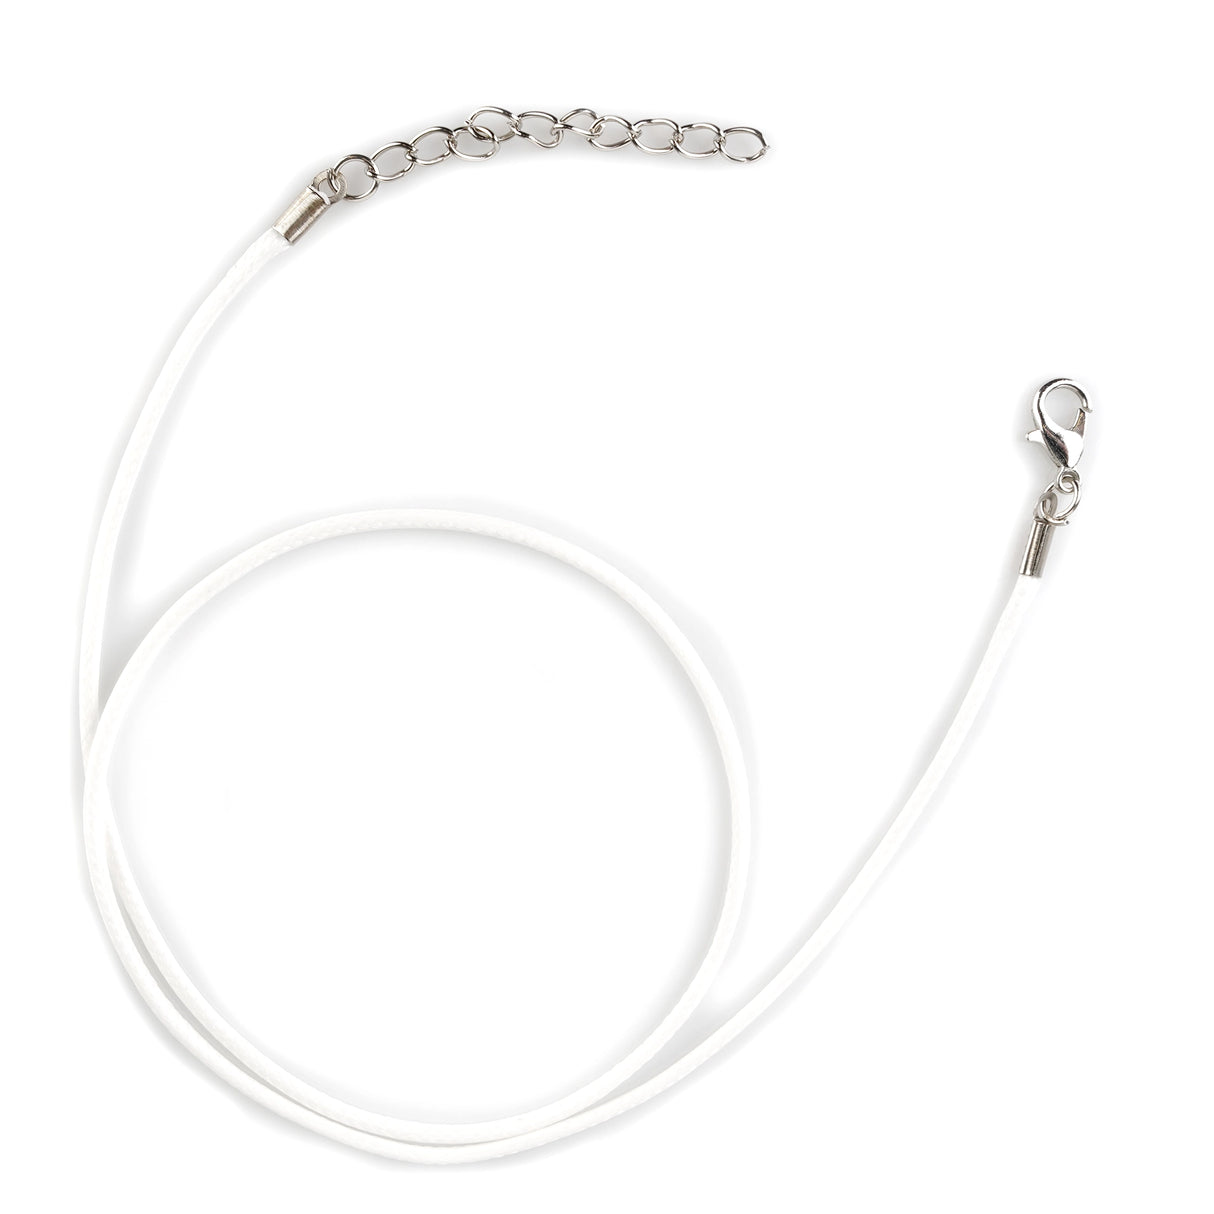 Wax Rope, Lobster Clasp & Extender Chain - White